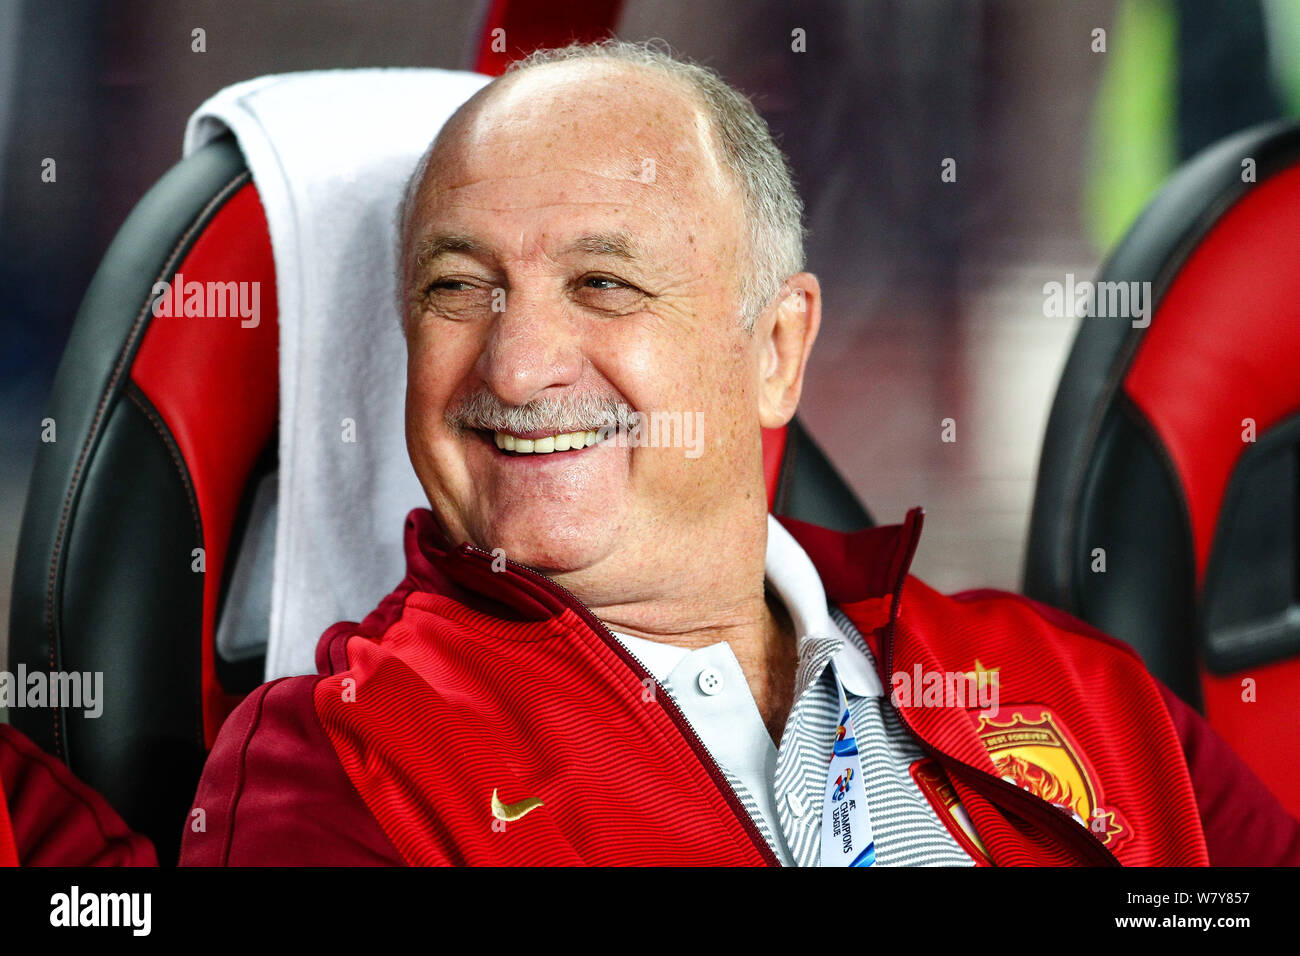 Head coach Luiz Felipe Scolari of China's Guangzhou Evergrande F.C. reacts as he watches his players competing against Japan's Kawasaki Frontale F.C. Stock Photo